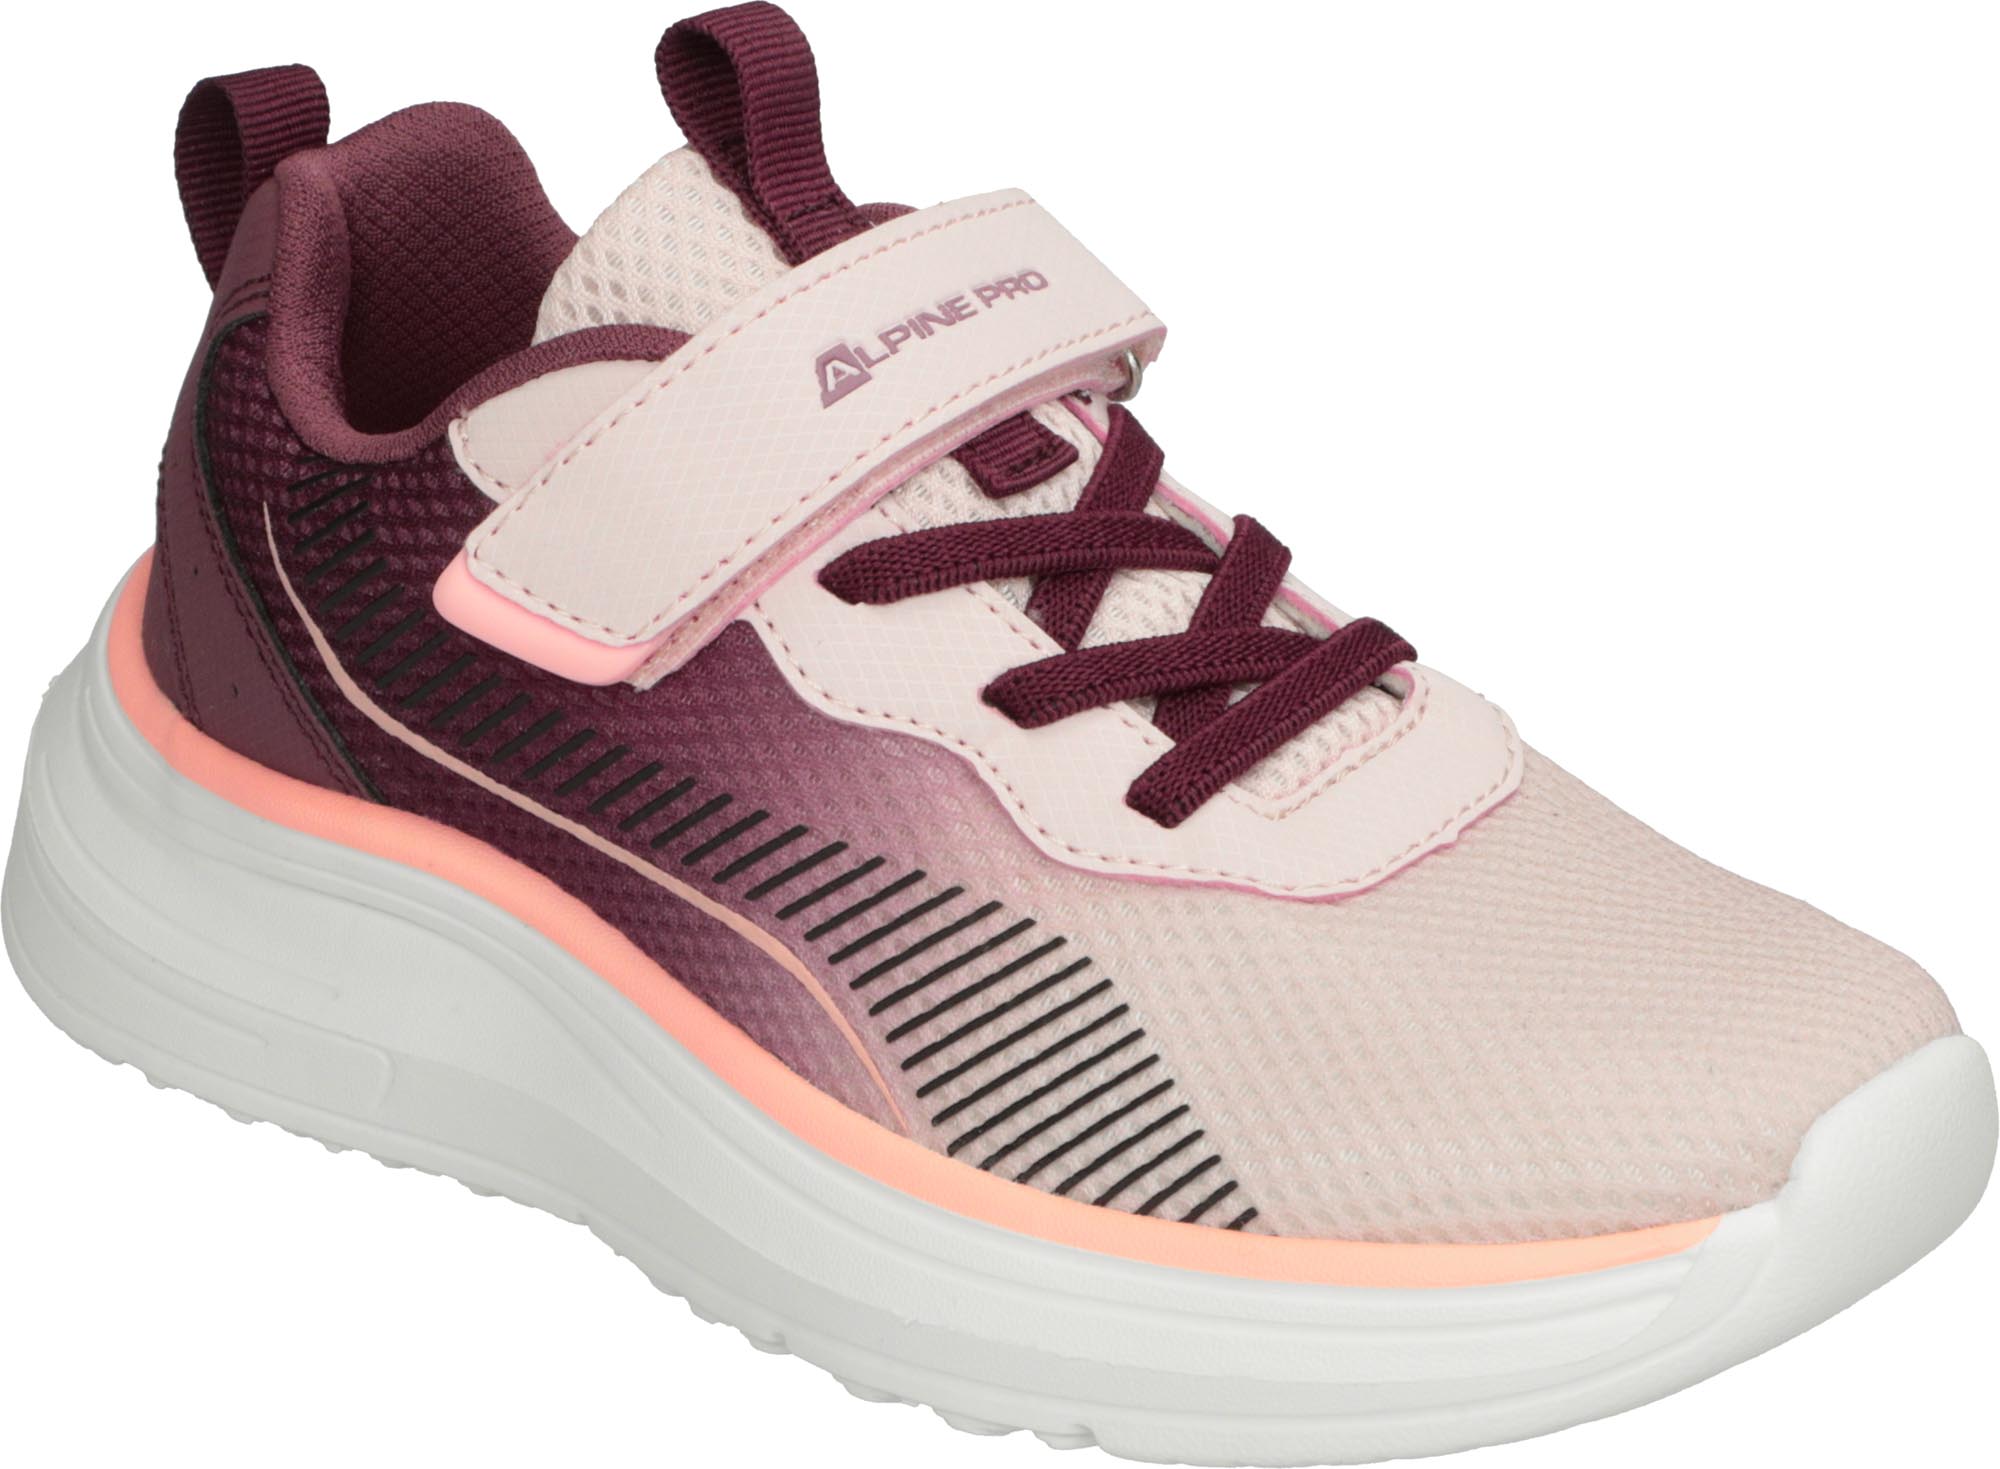 Girls' sports shoes